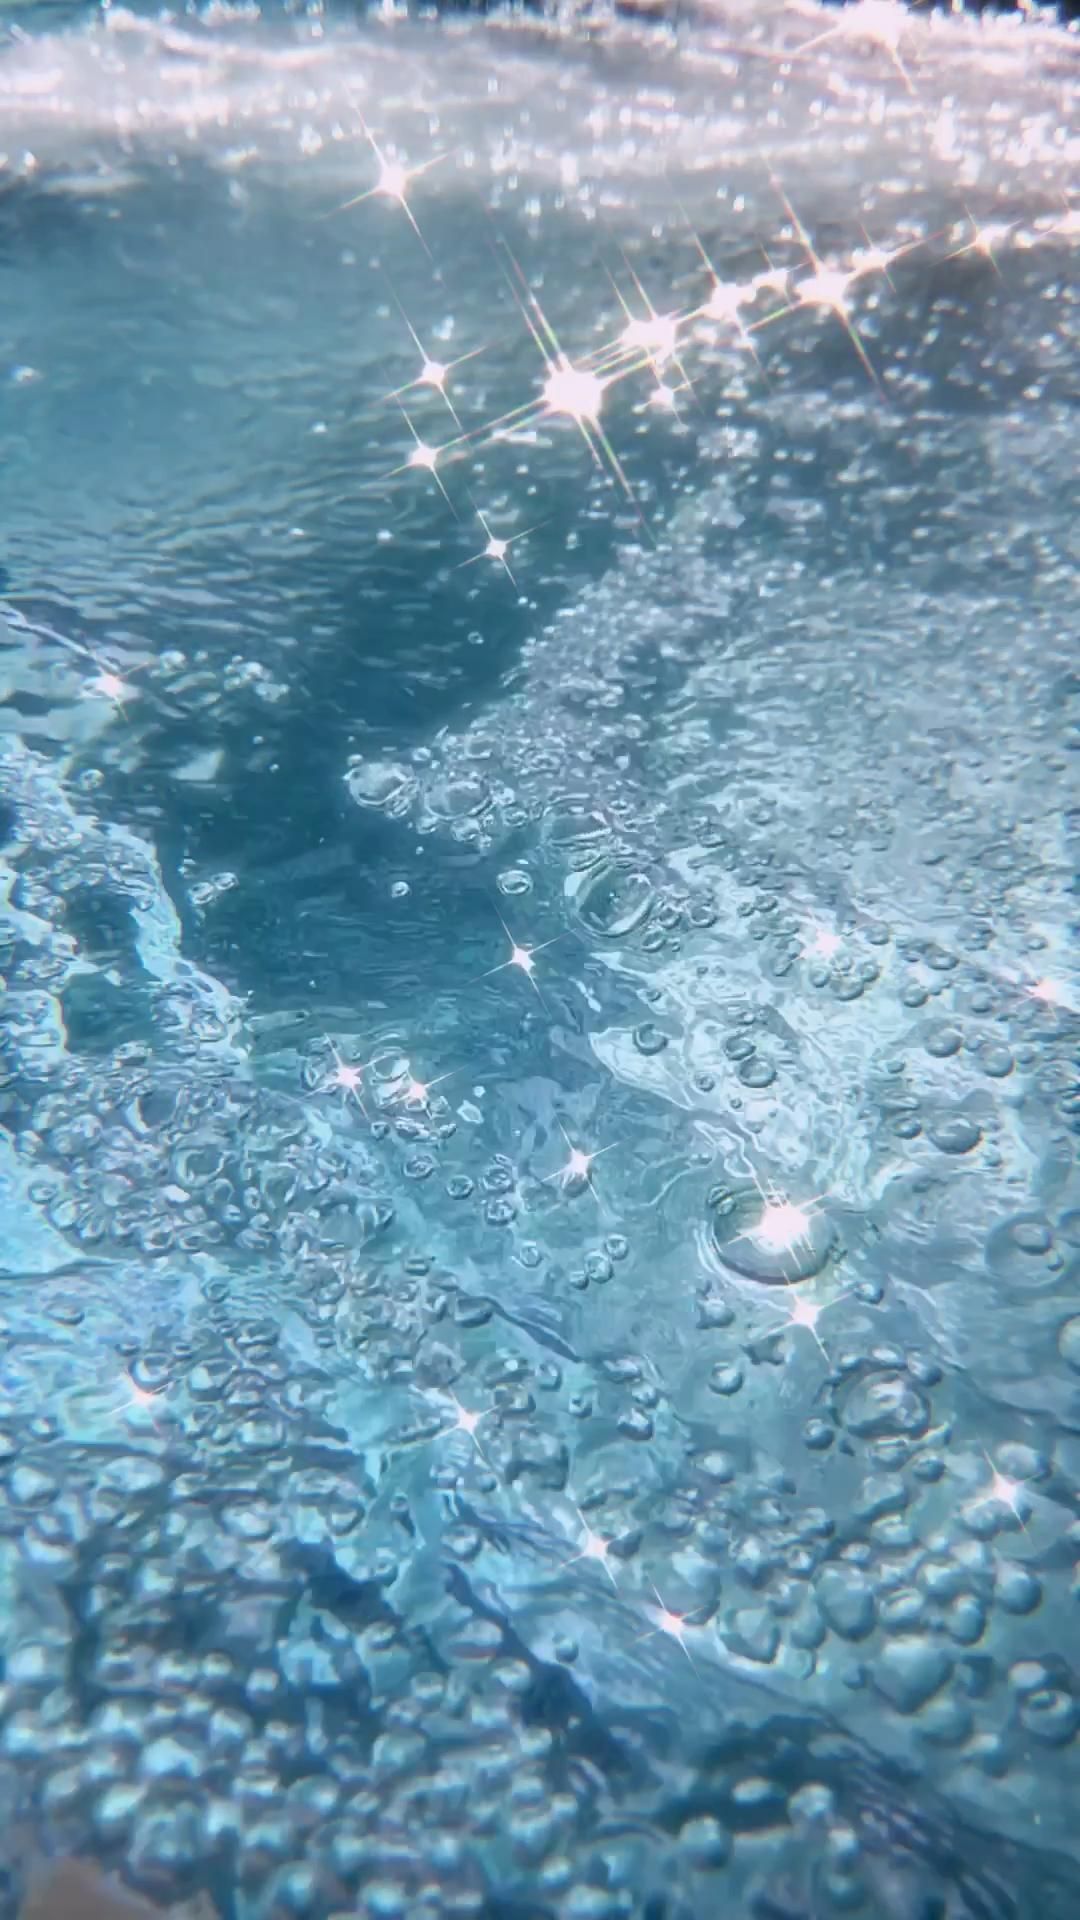 A close up of water with bubbles in it - Underwater, water